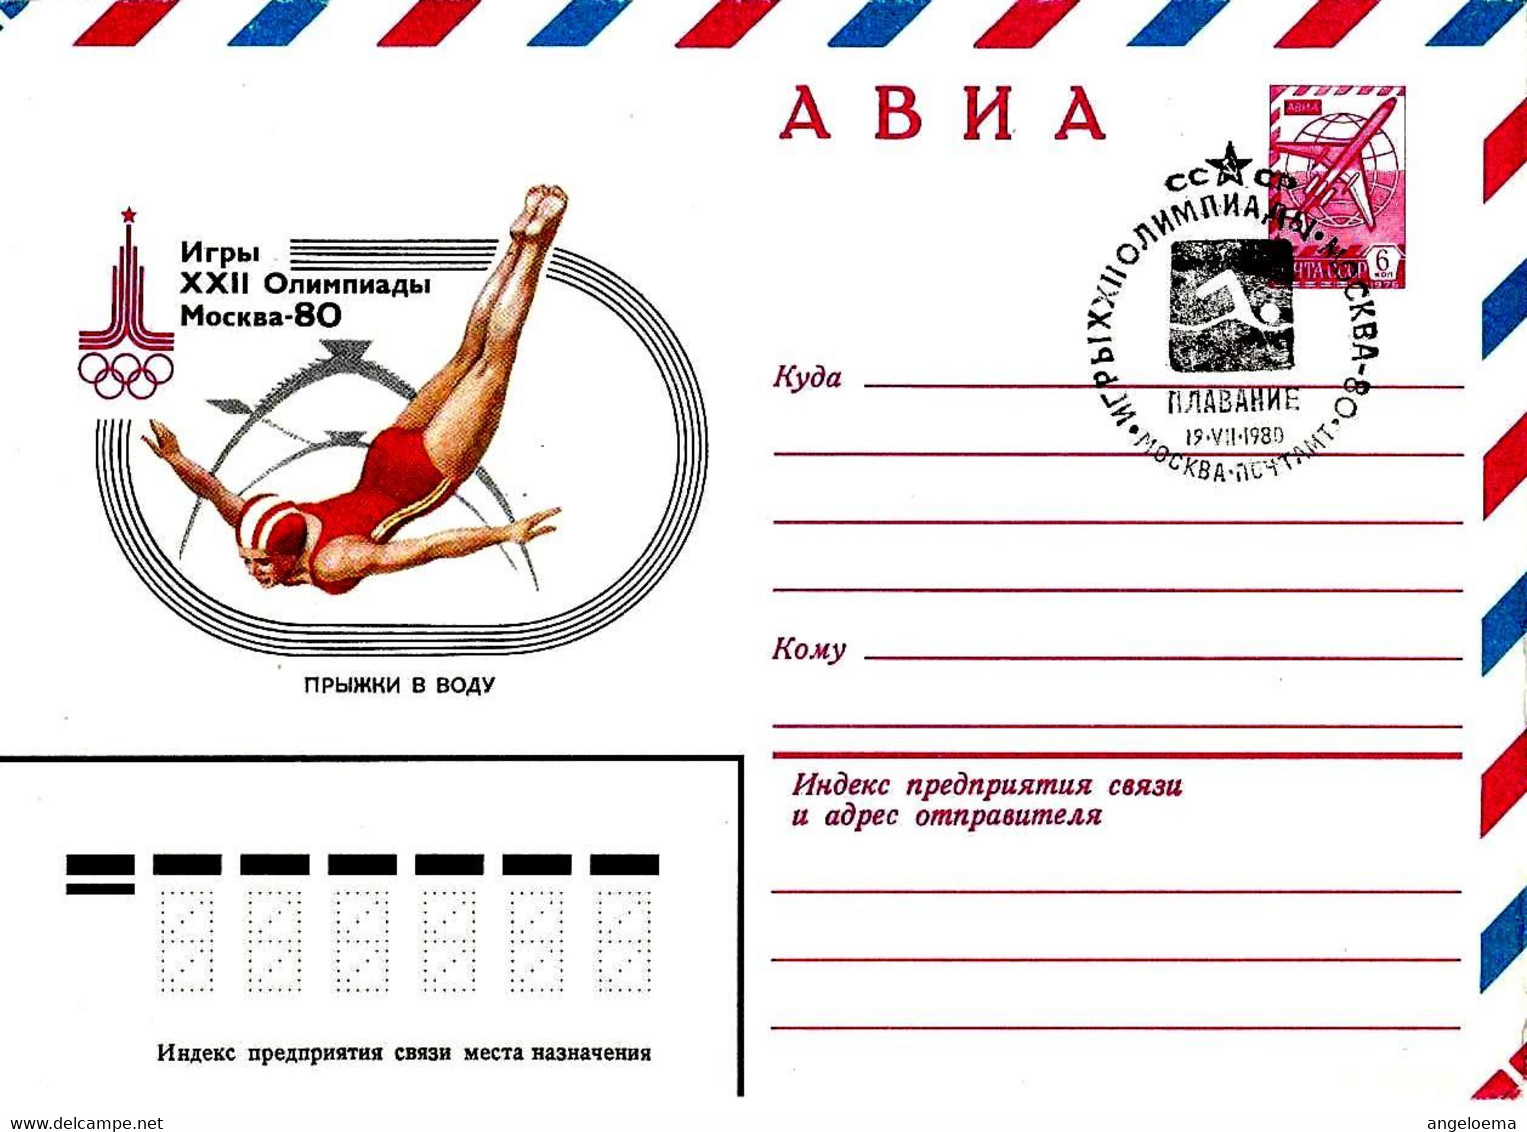 URSS - 1980 MOSCA XXII Giochi Olimpici Olympic Games Busta Postale TUFFI Diving - 7459 - High Diving